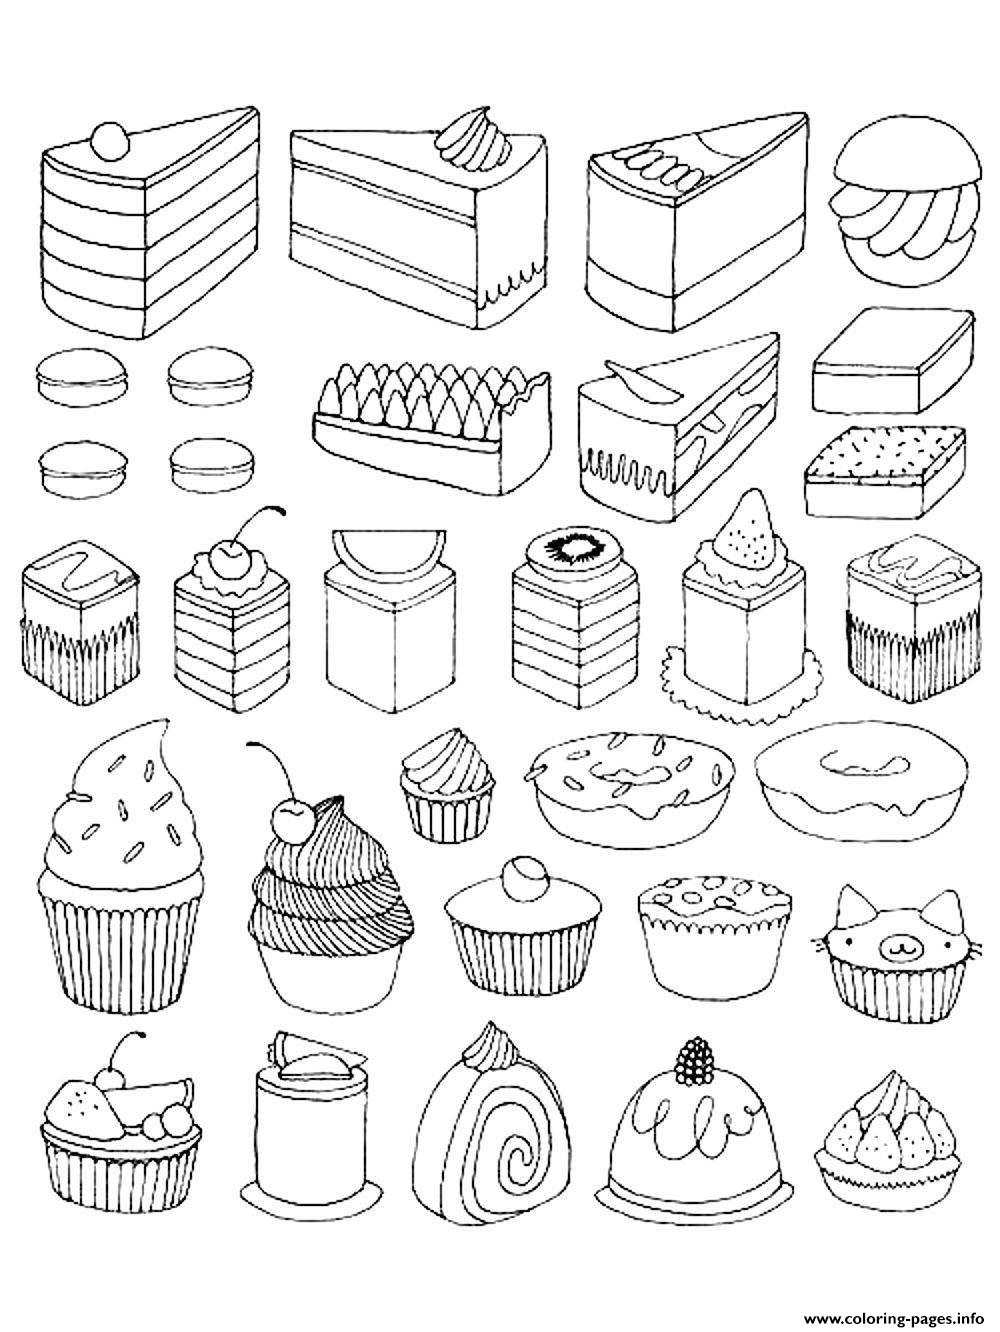 Adult Cupcakes And Little Cakes coloring